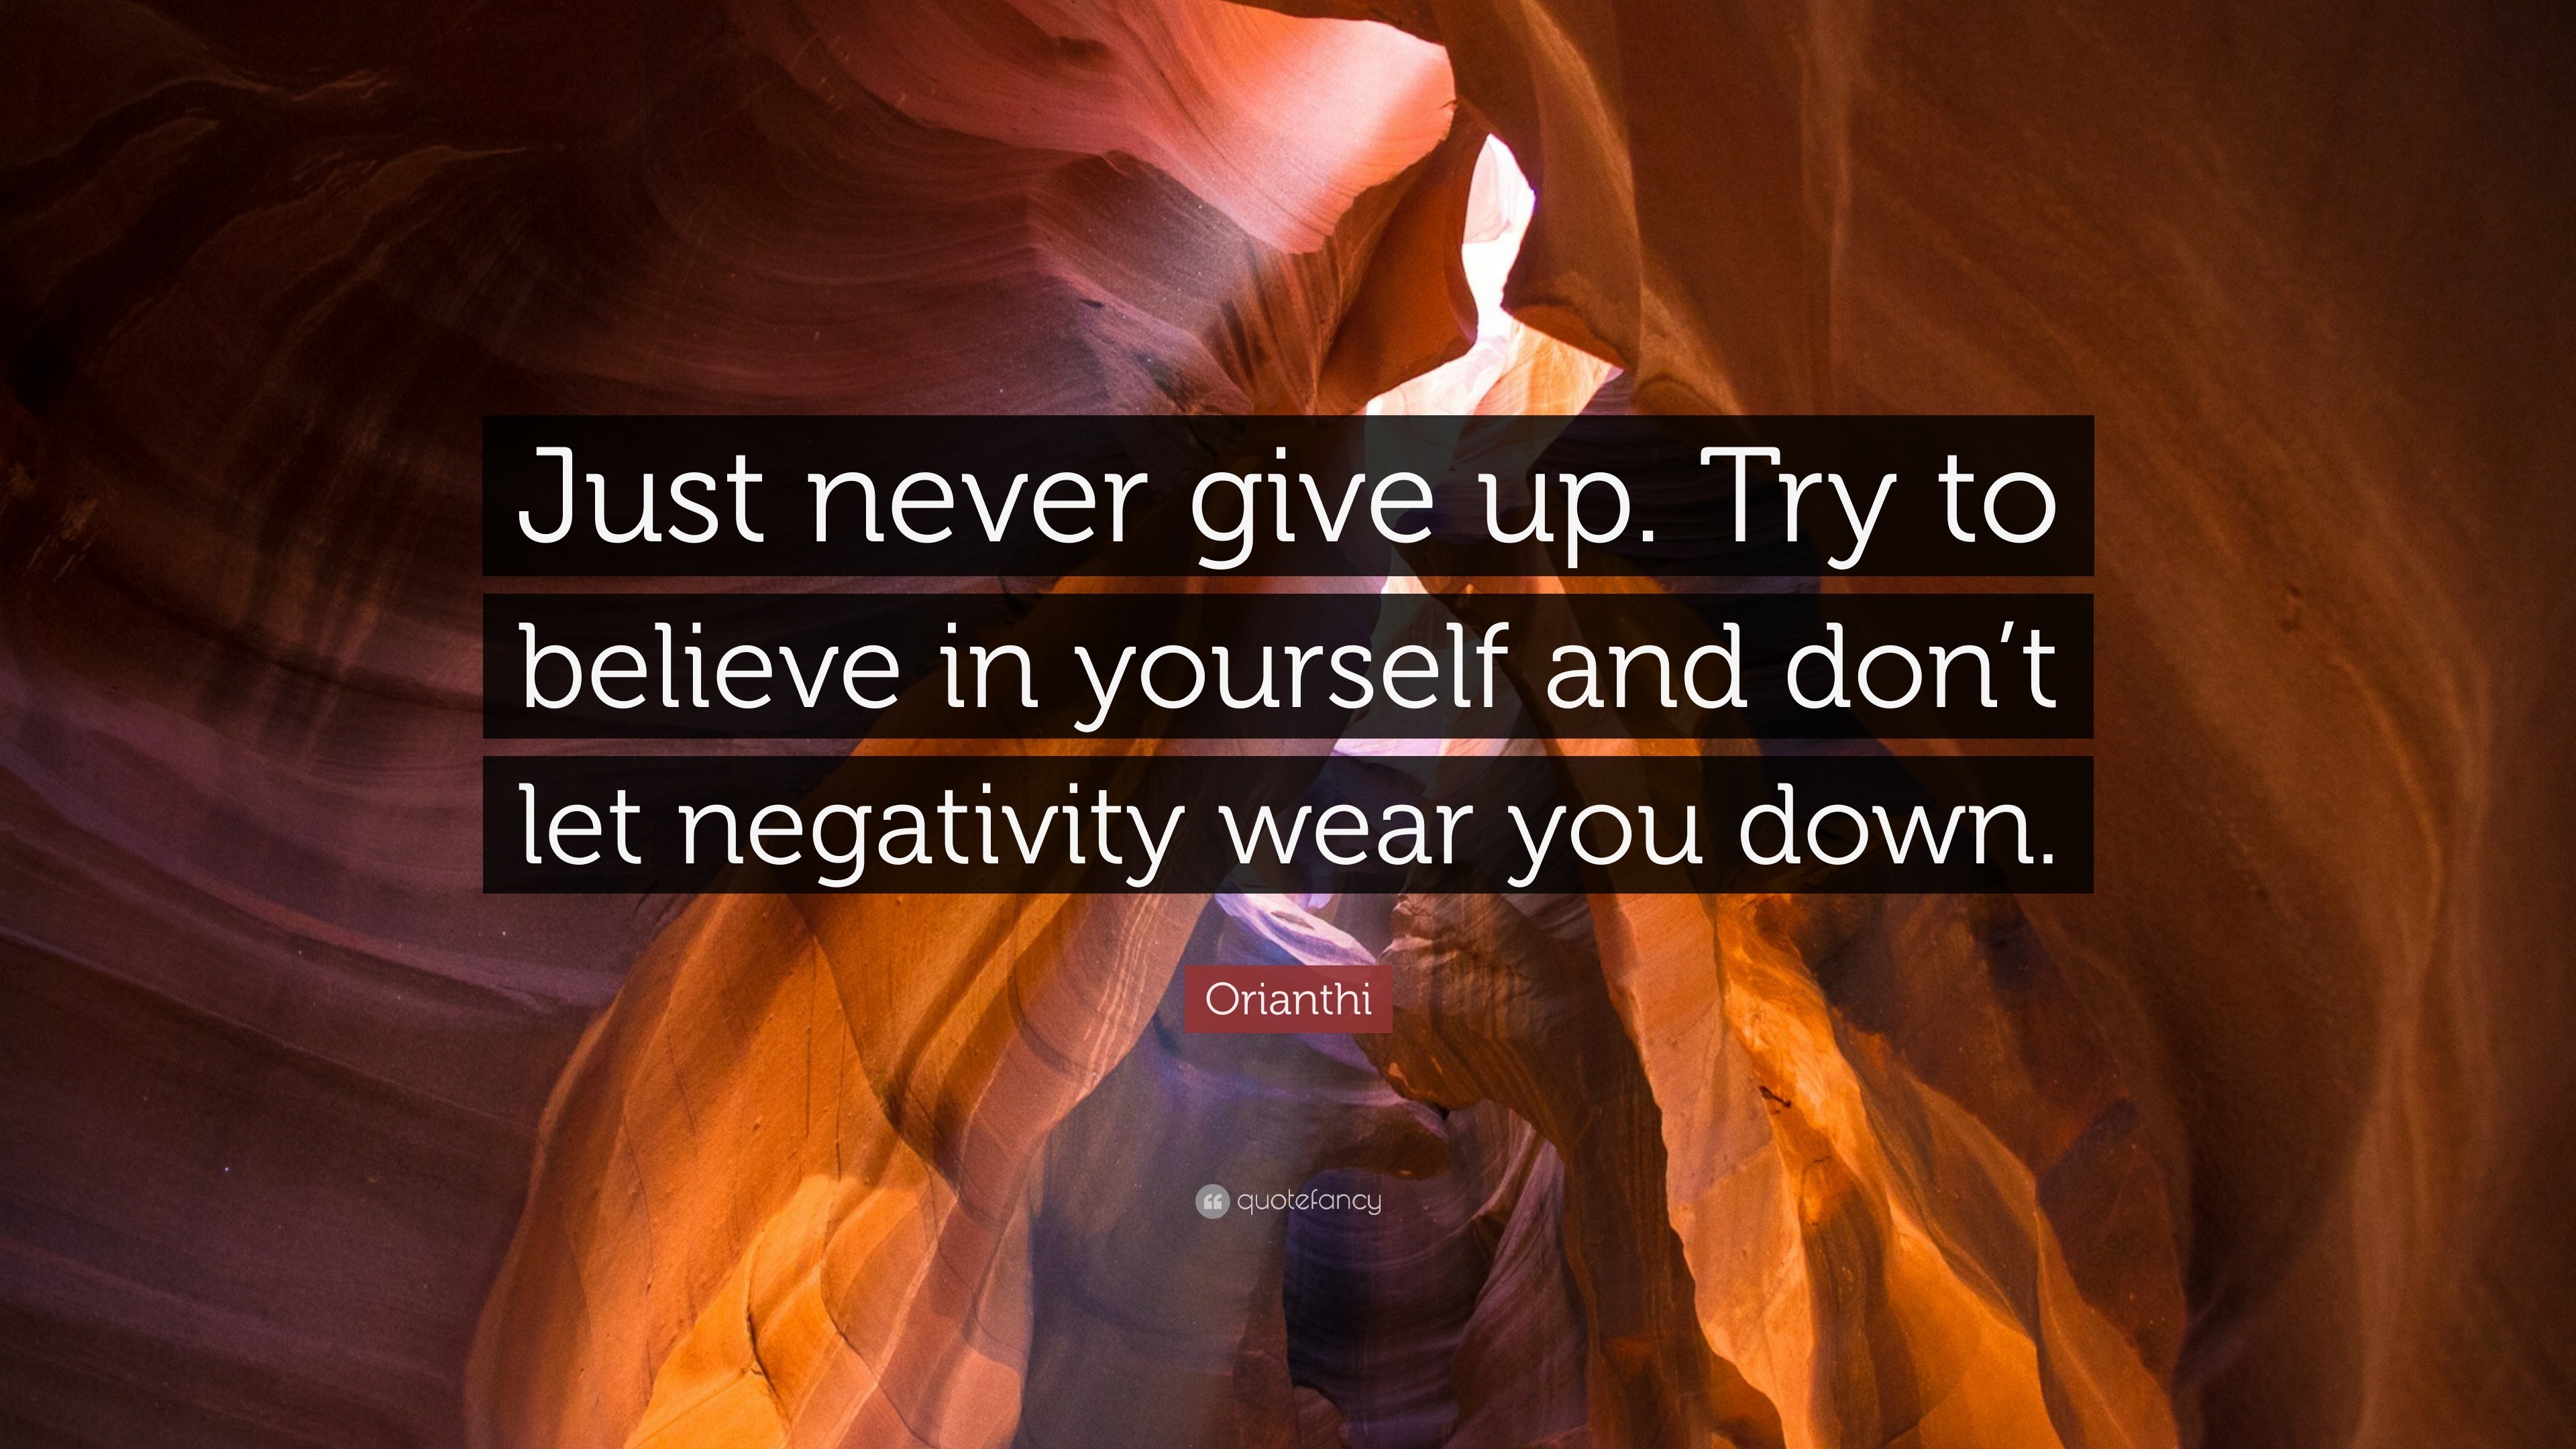 Orianthi Quote “Just never give up Try to believe in yourself and don